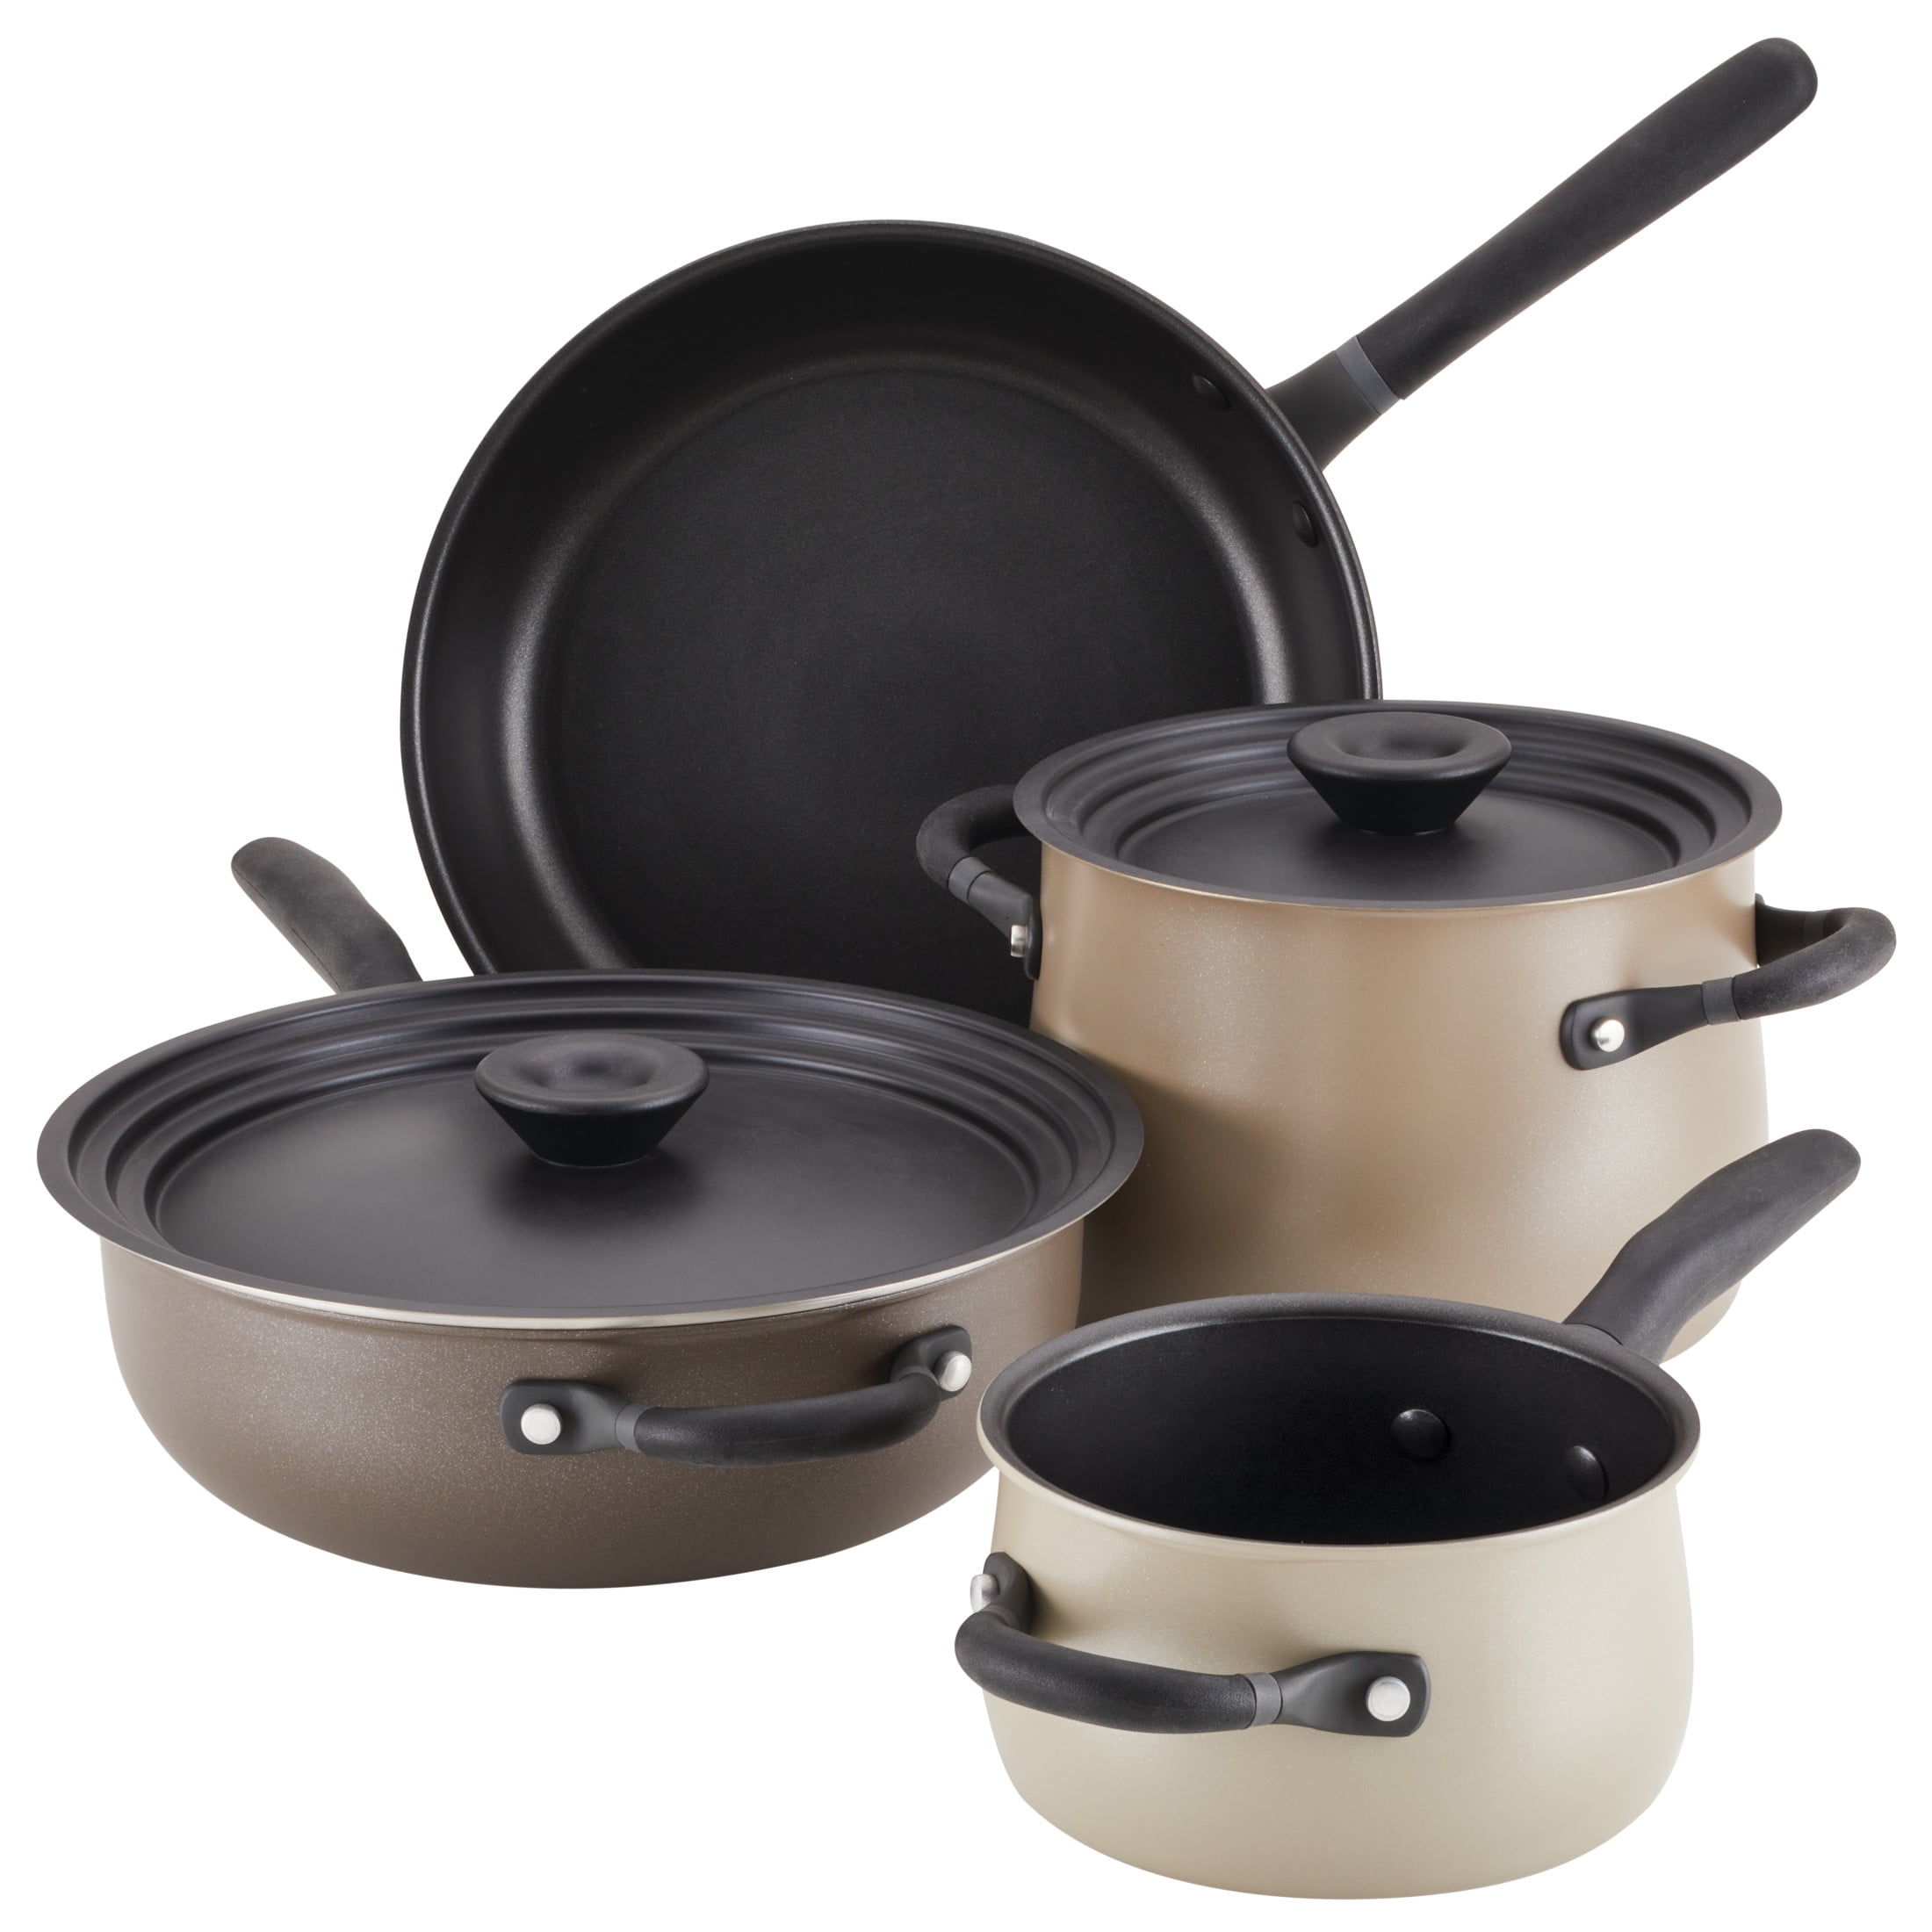 The Best Non-Stick Cookware for Induction Cooktops - Prudent Reviews